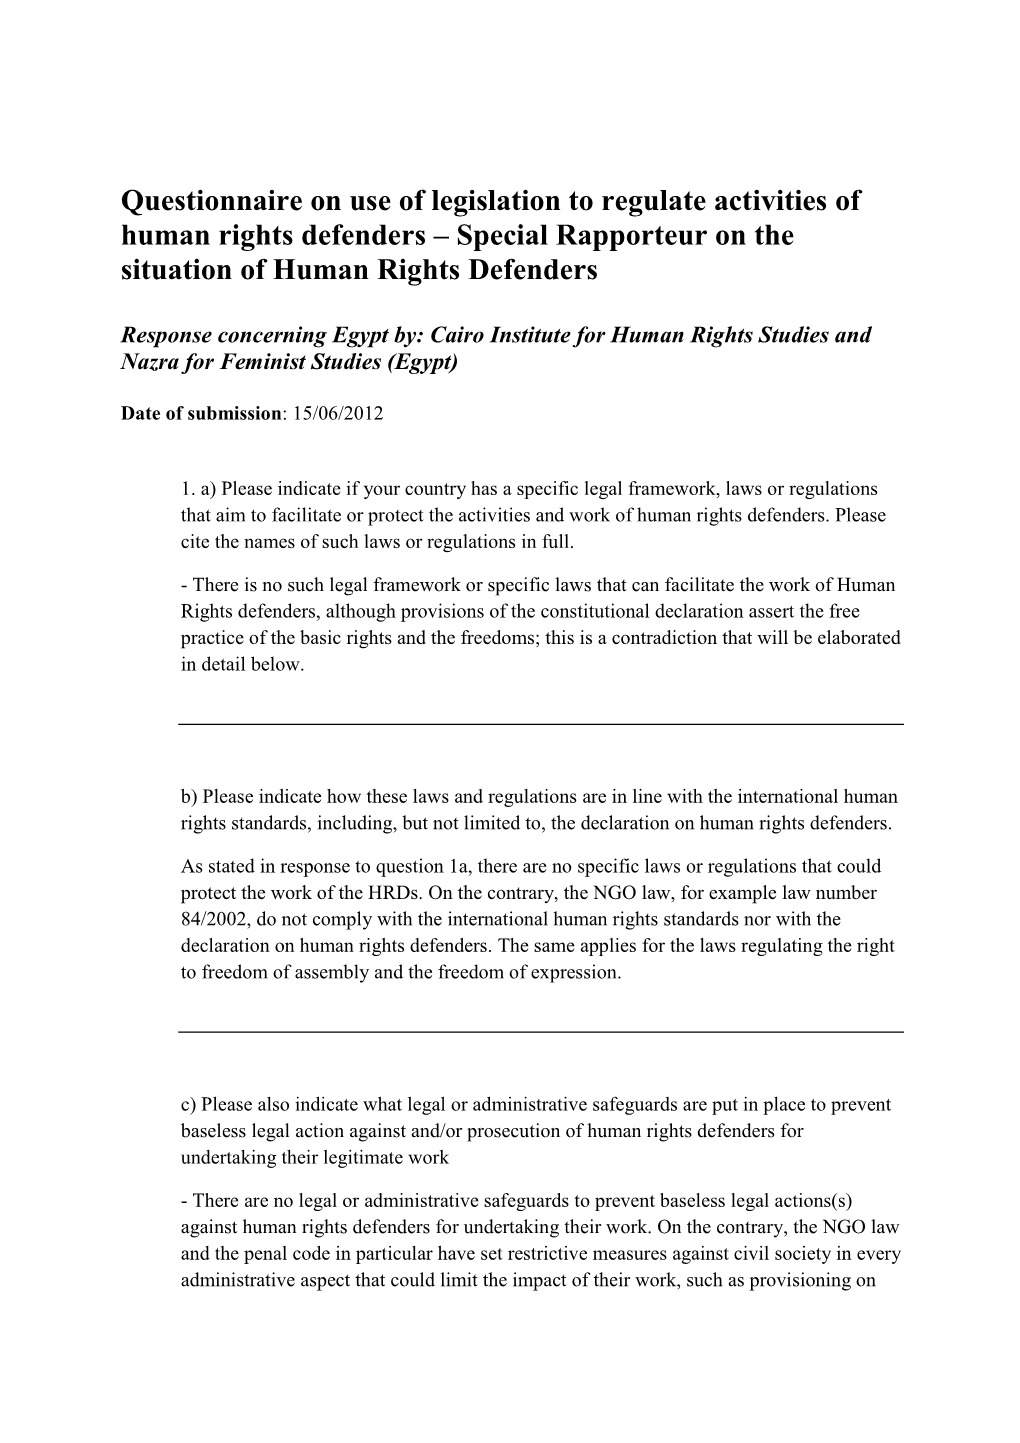 Questionnaire on Use of Legislation to Regulate Activities of Human Rights Defenders – Special Rapporteur on the Situation of Human Rights Defenders